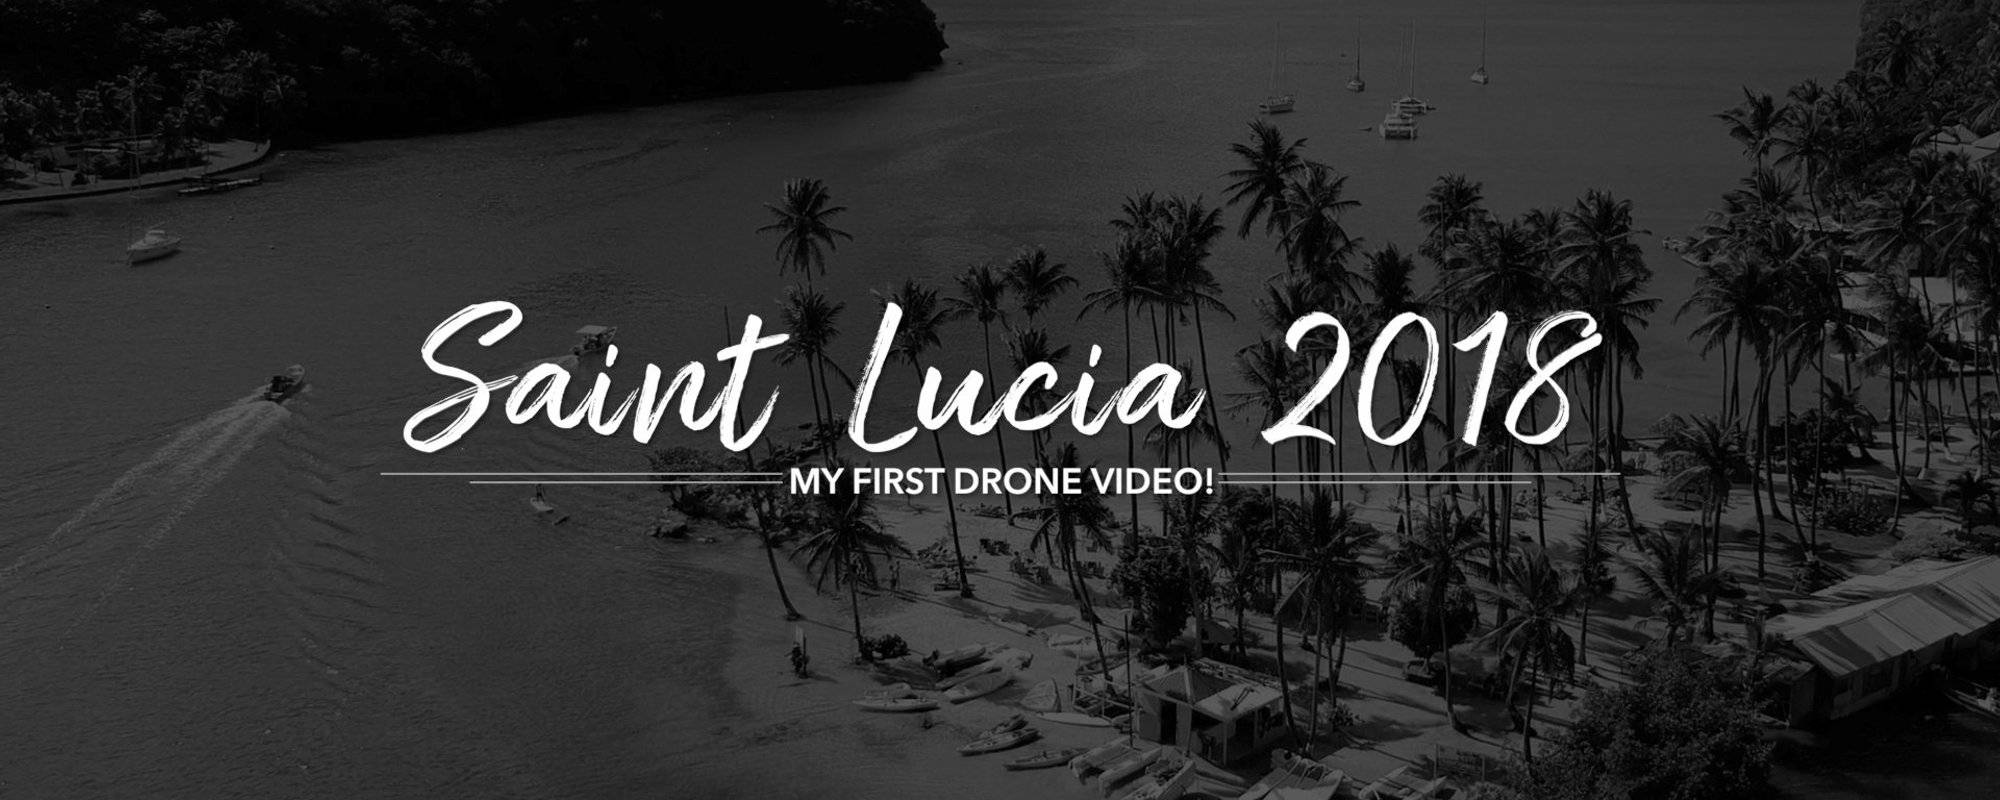 I'm back from Saint Lucia and I created my first drone video!